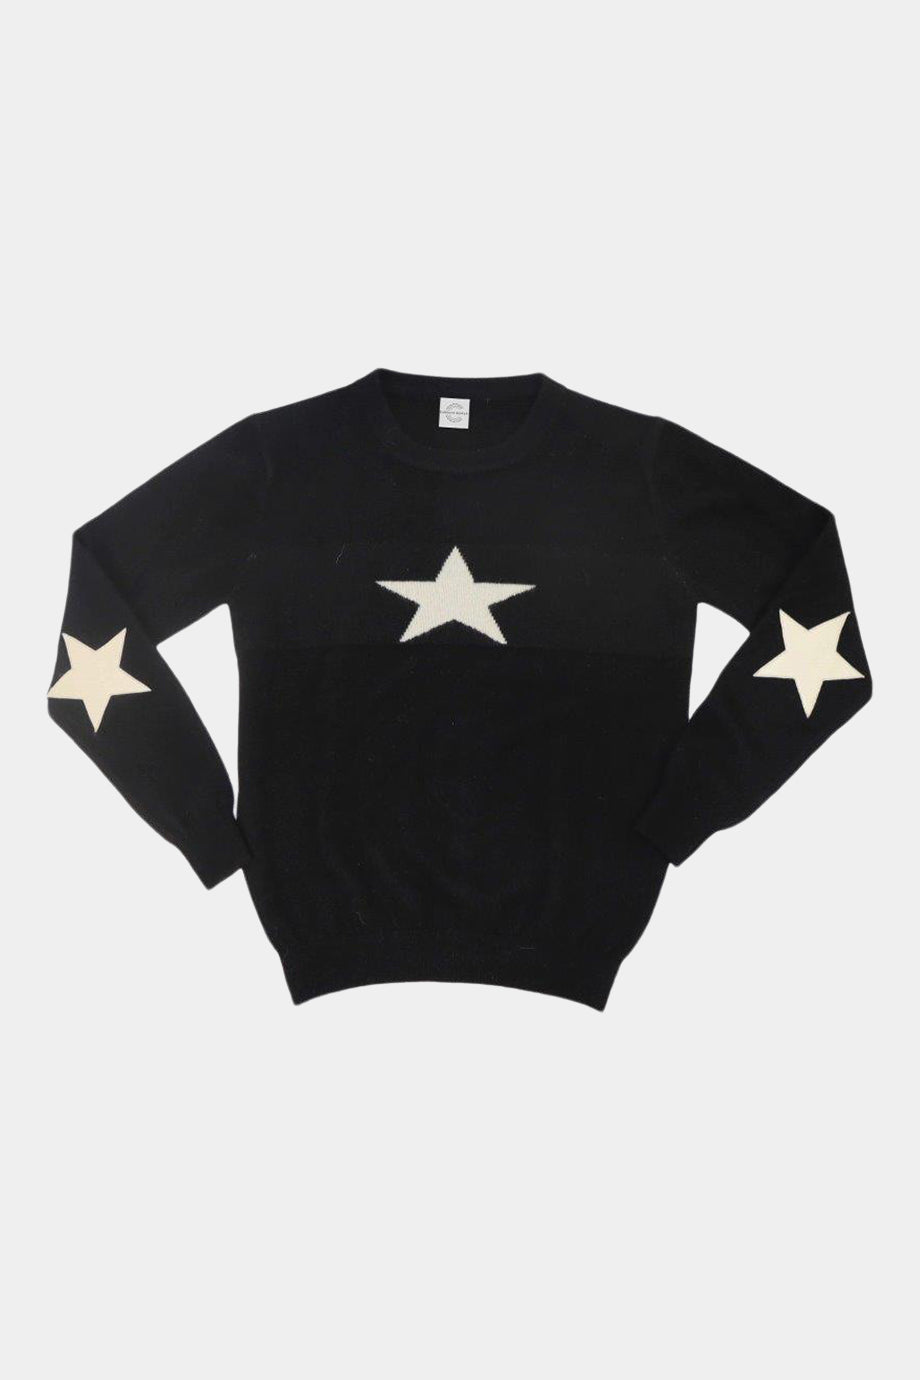 Crewneck Sweater with Star and Leather Star Patches on Elbow